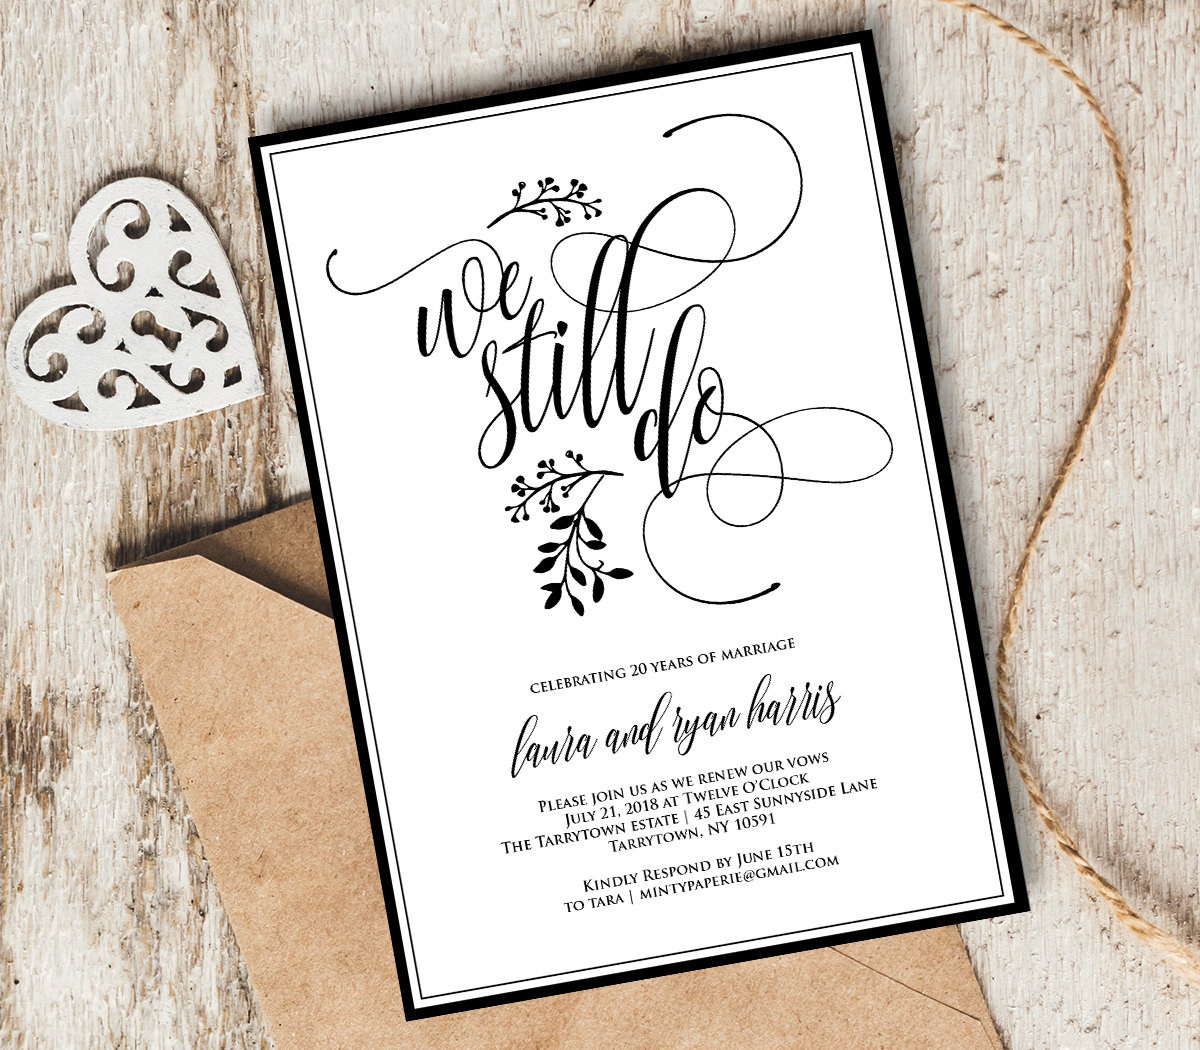 Renew Wedding Vows
 Vow Renewal Invitation Template We Still Do Instant